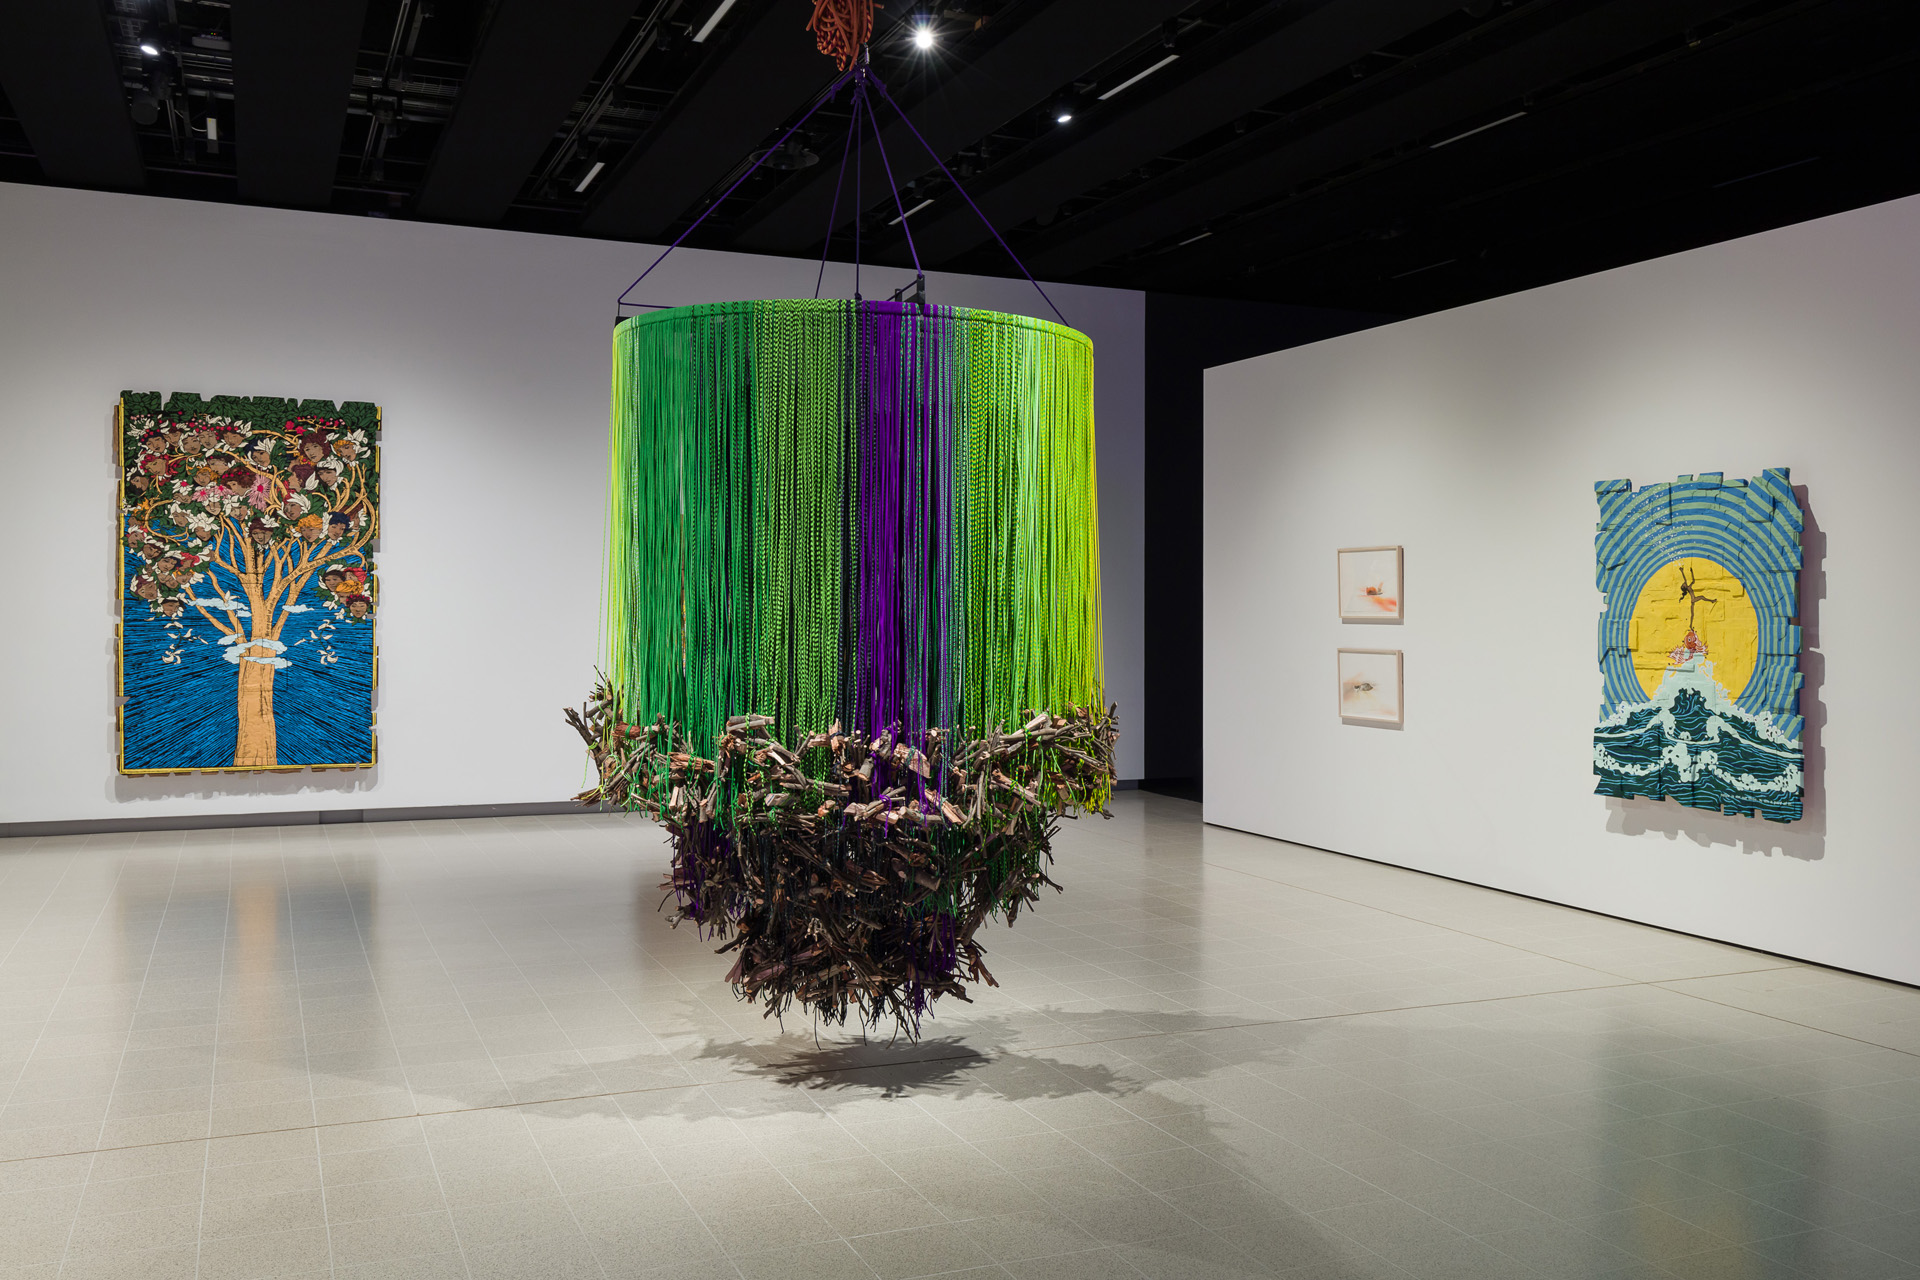 Installation view of Andrea Bowers, Dear Earth: Art and Hope in a Time of Crisis